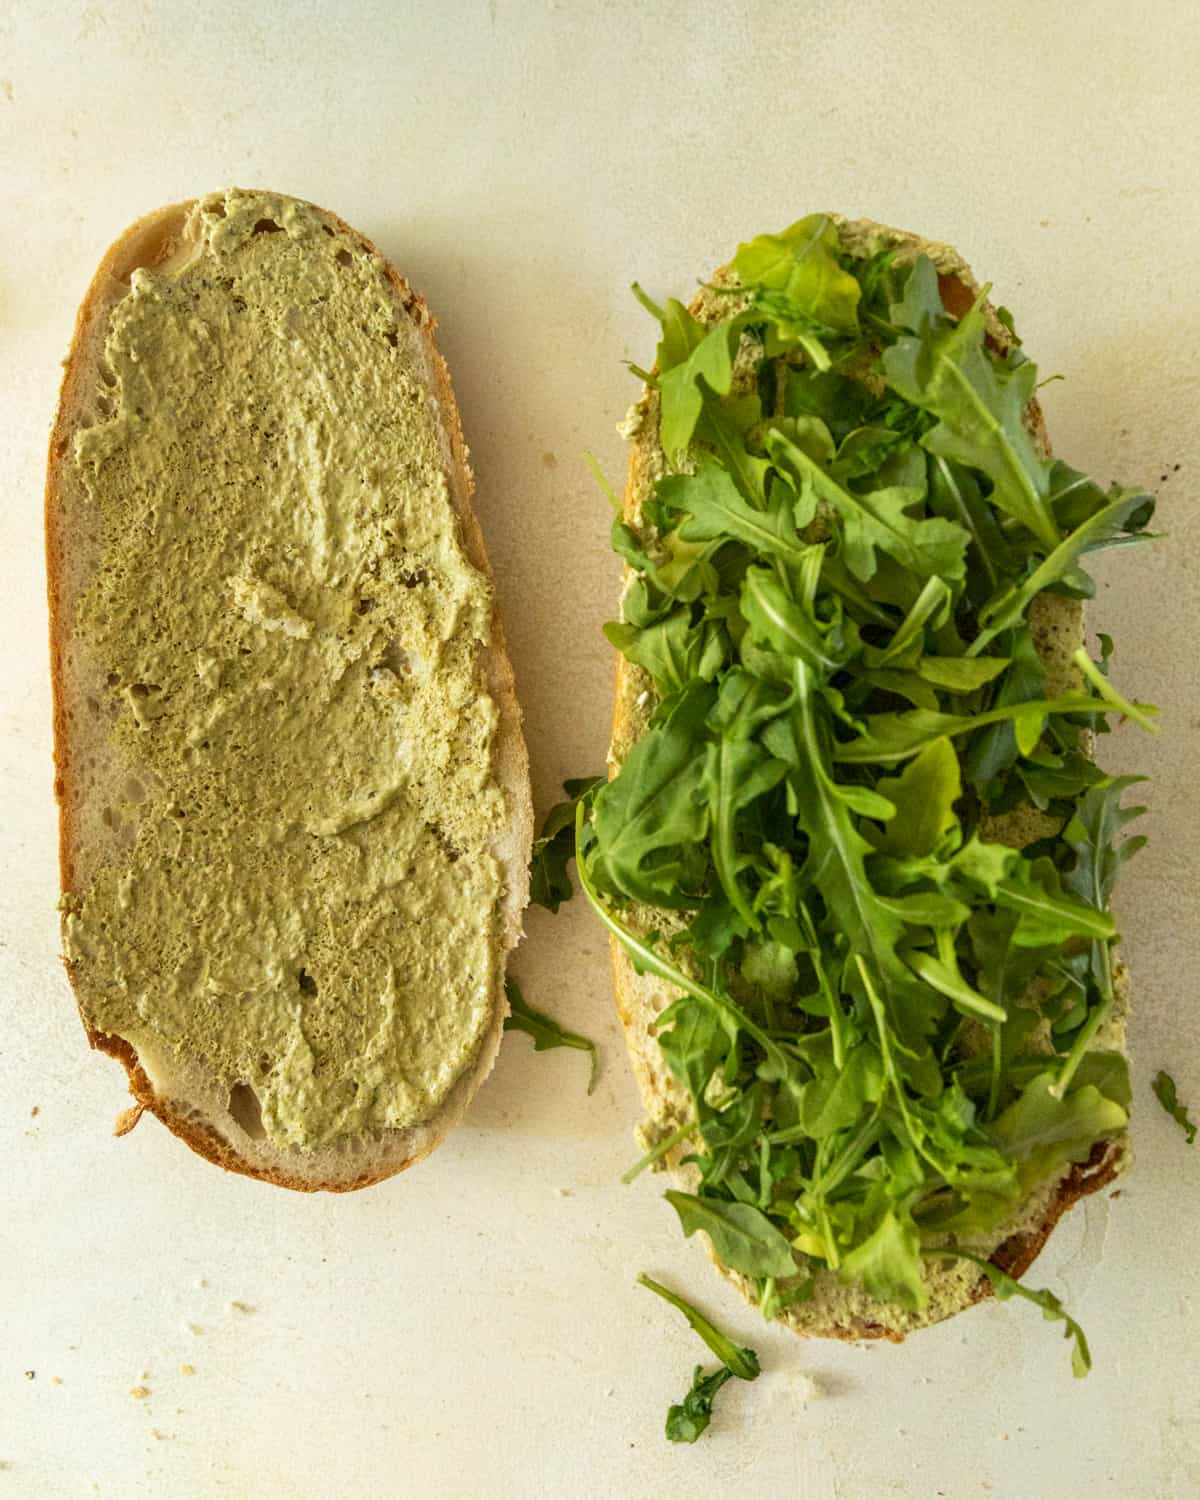 cibatta bread sliced in half. One side has pesto mayo spread on top and the other side of bread has arugula on top of the bread.